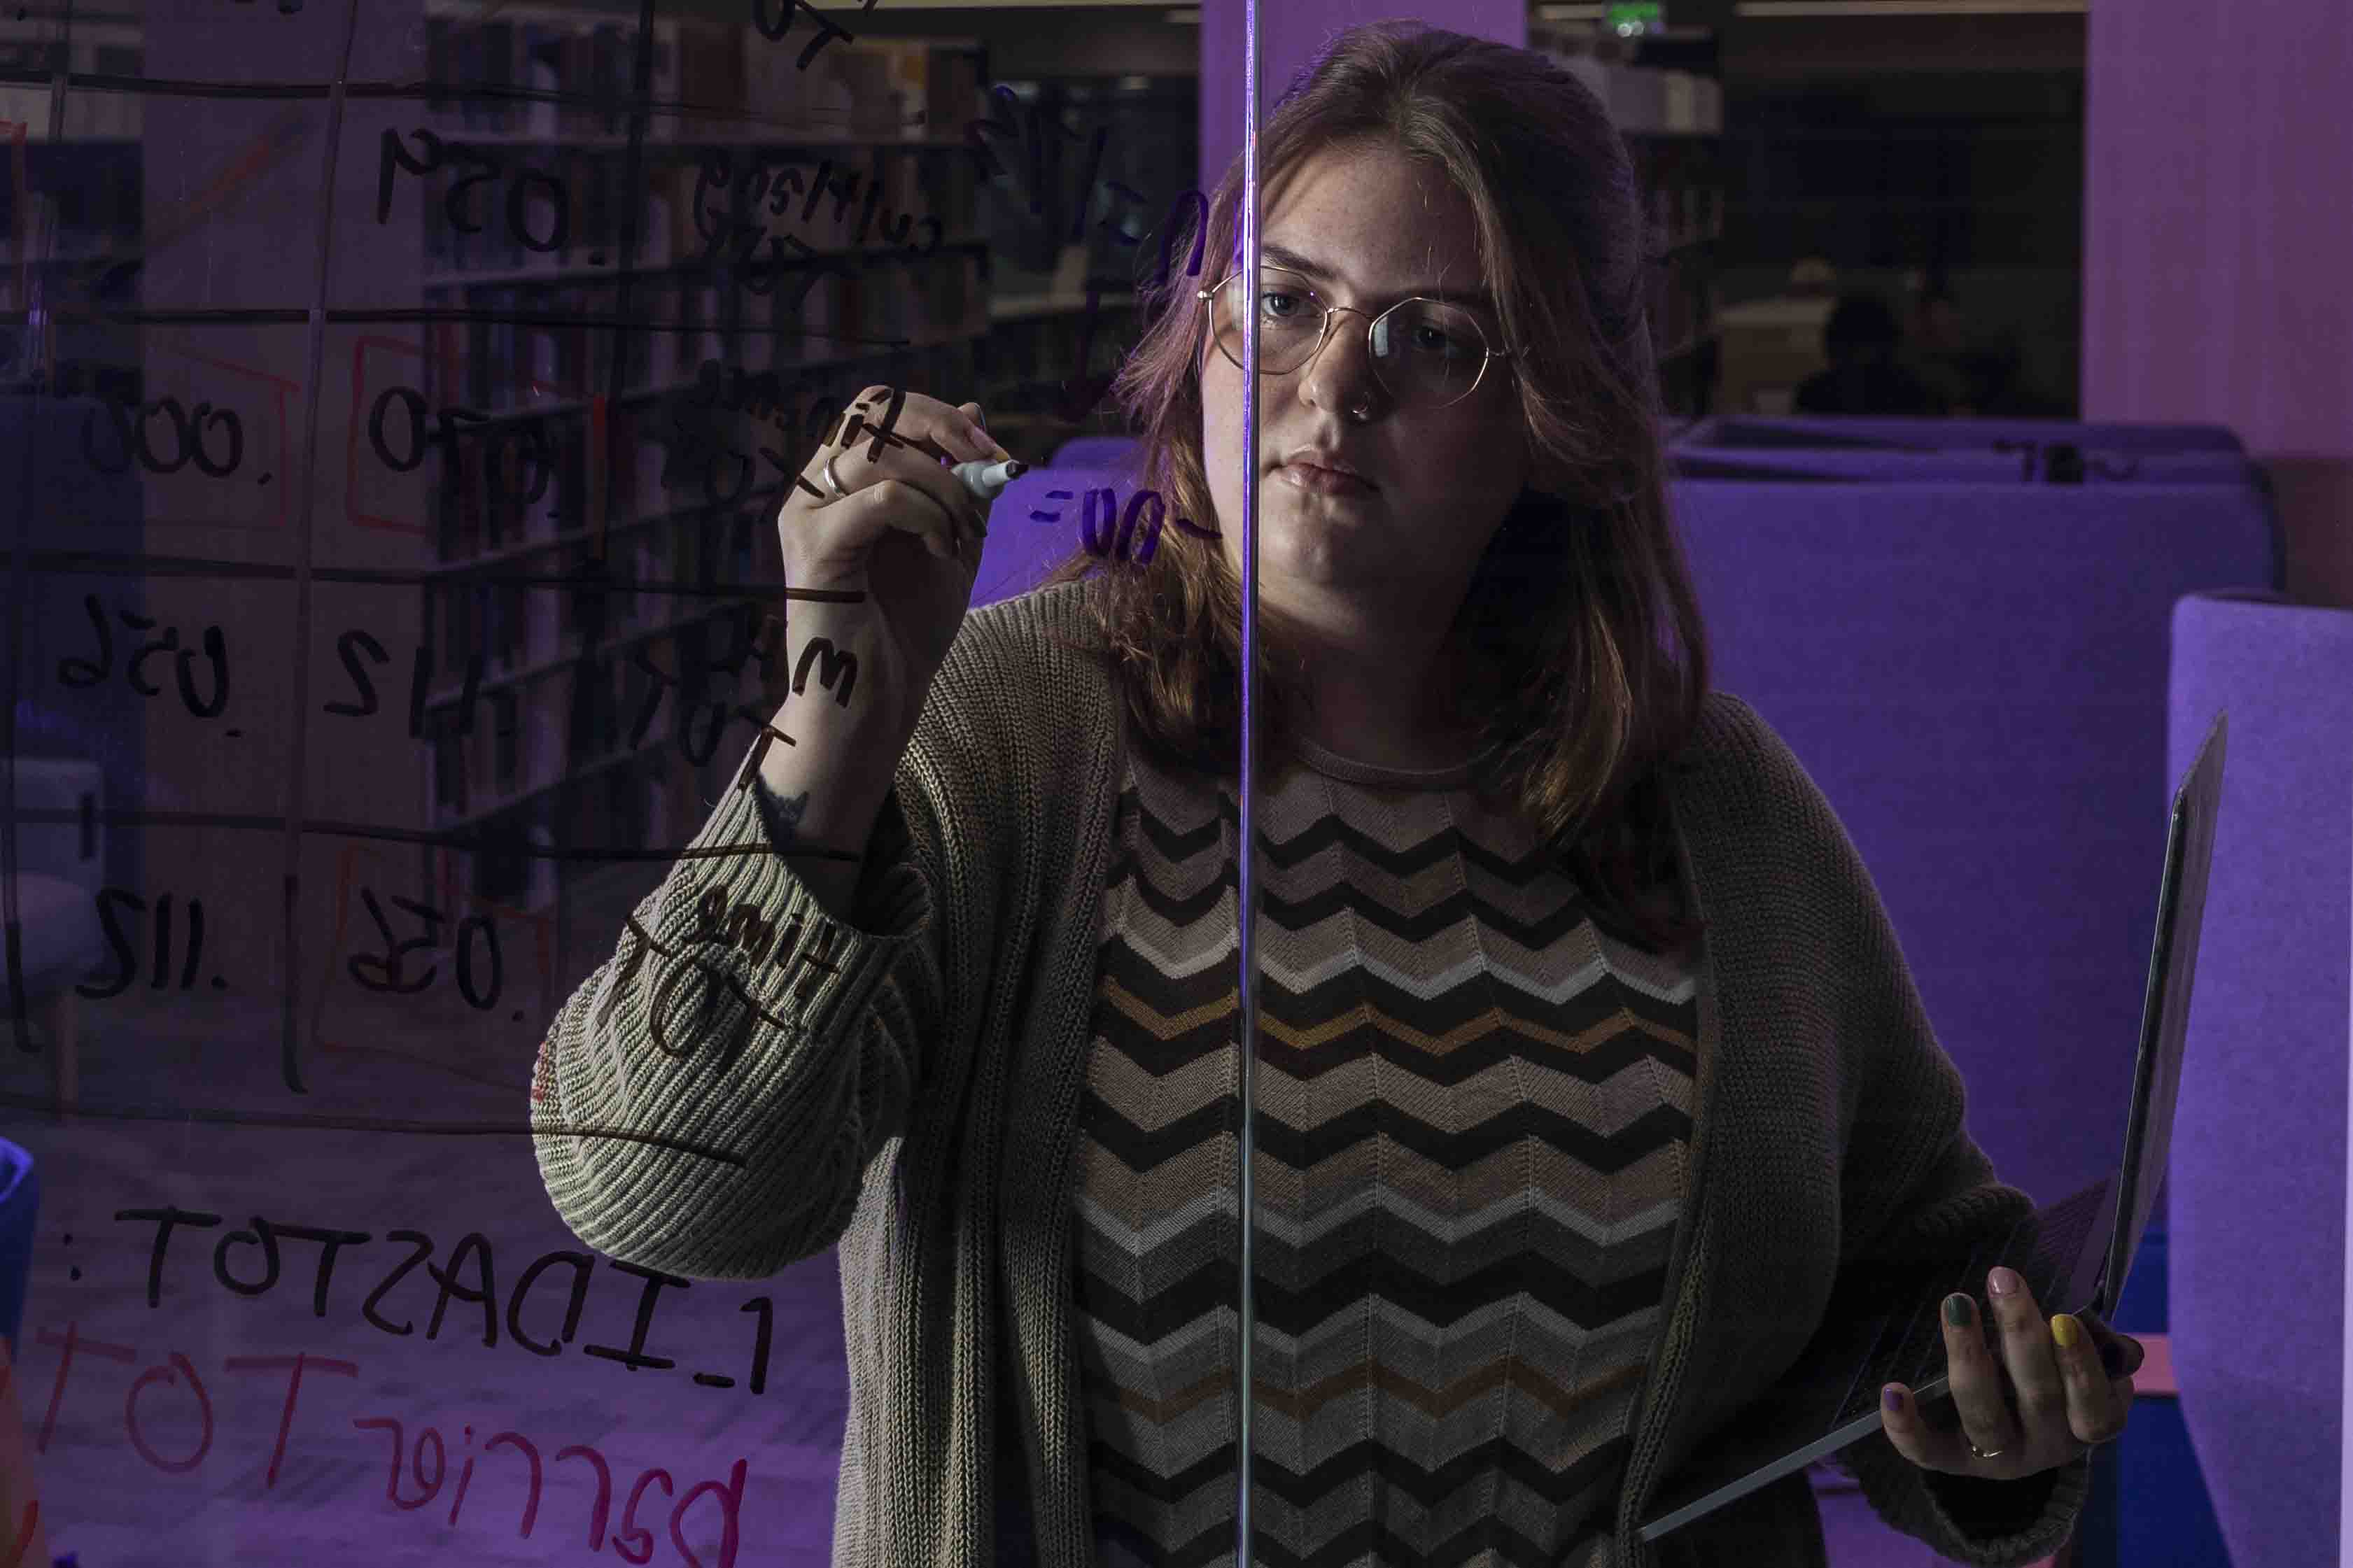 Maddie stands behind a clear class board with black marker in her hand writing down formulas in a darkened, purple lit background.